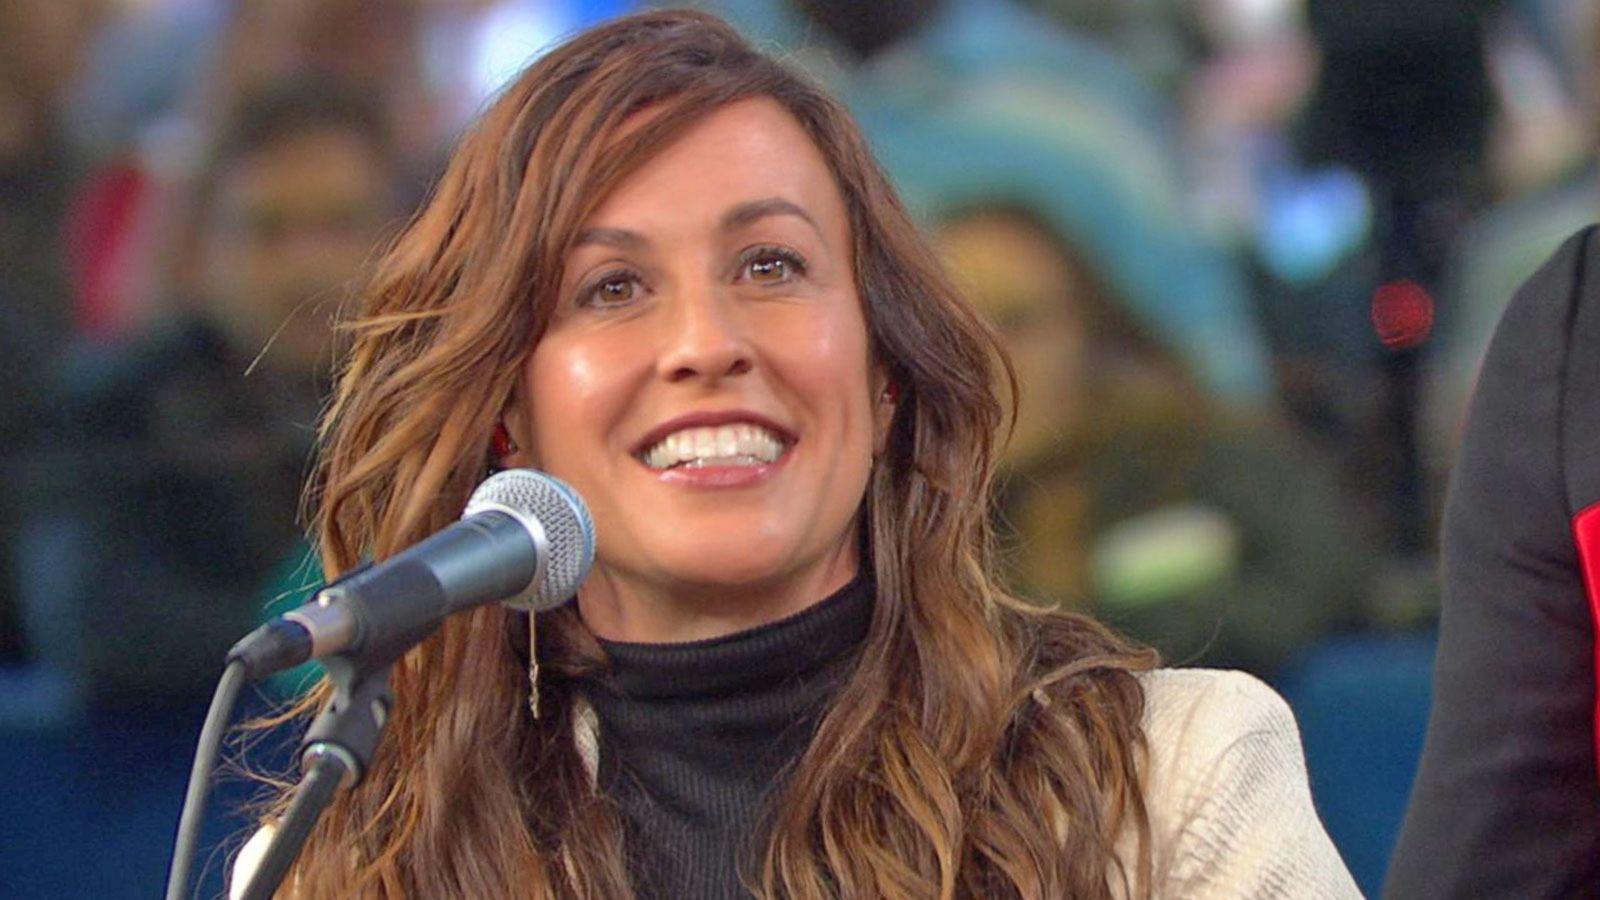 Alanis Morissette is pregnant with third child, working on new music